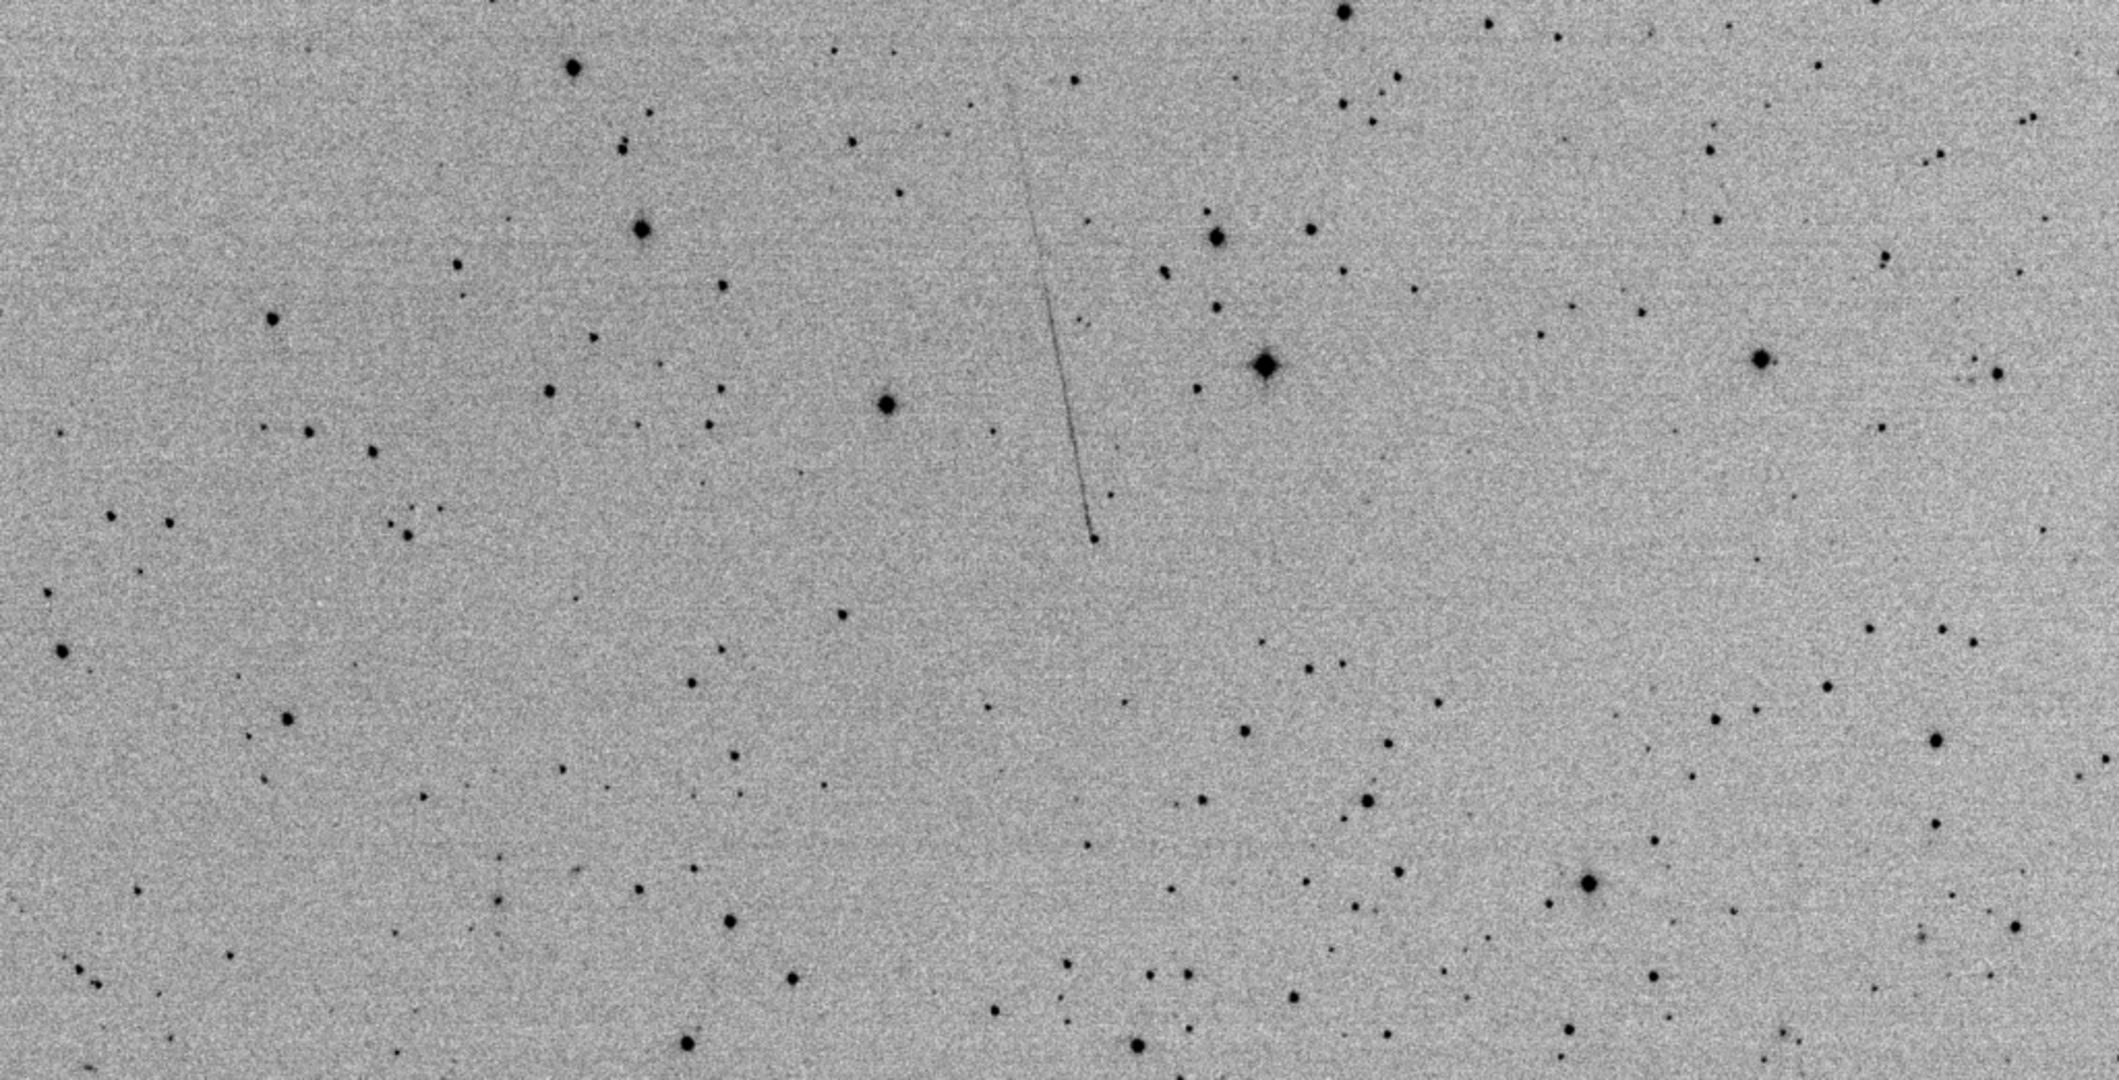 asteroid-2024-bx1-tracked-prior-to-impact-pillars